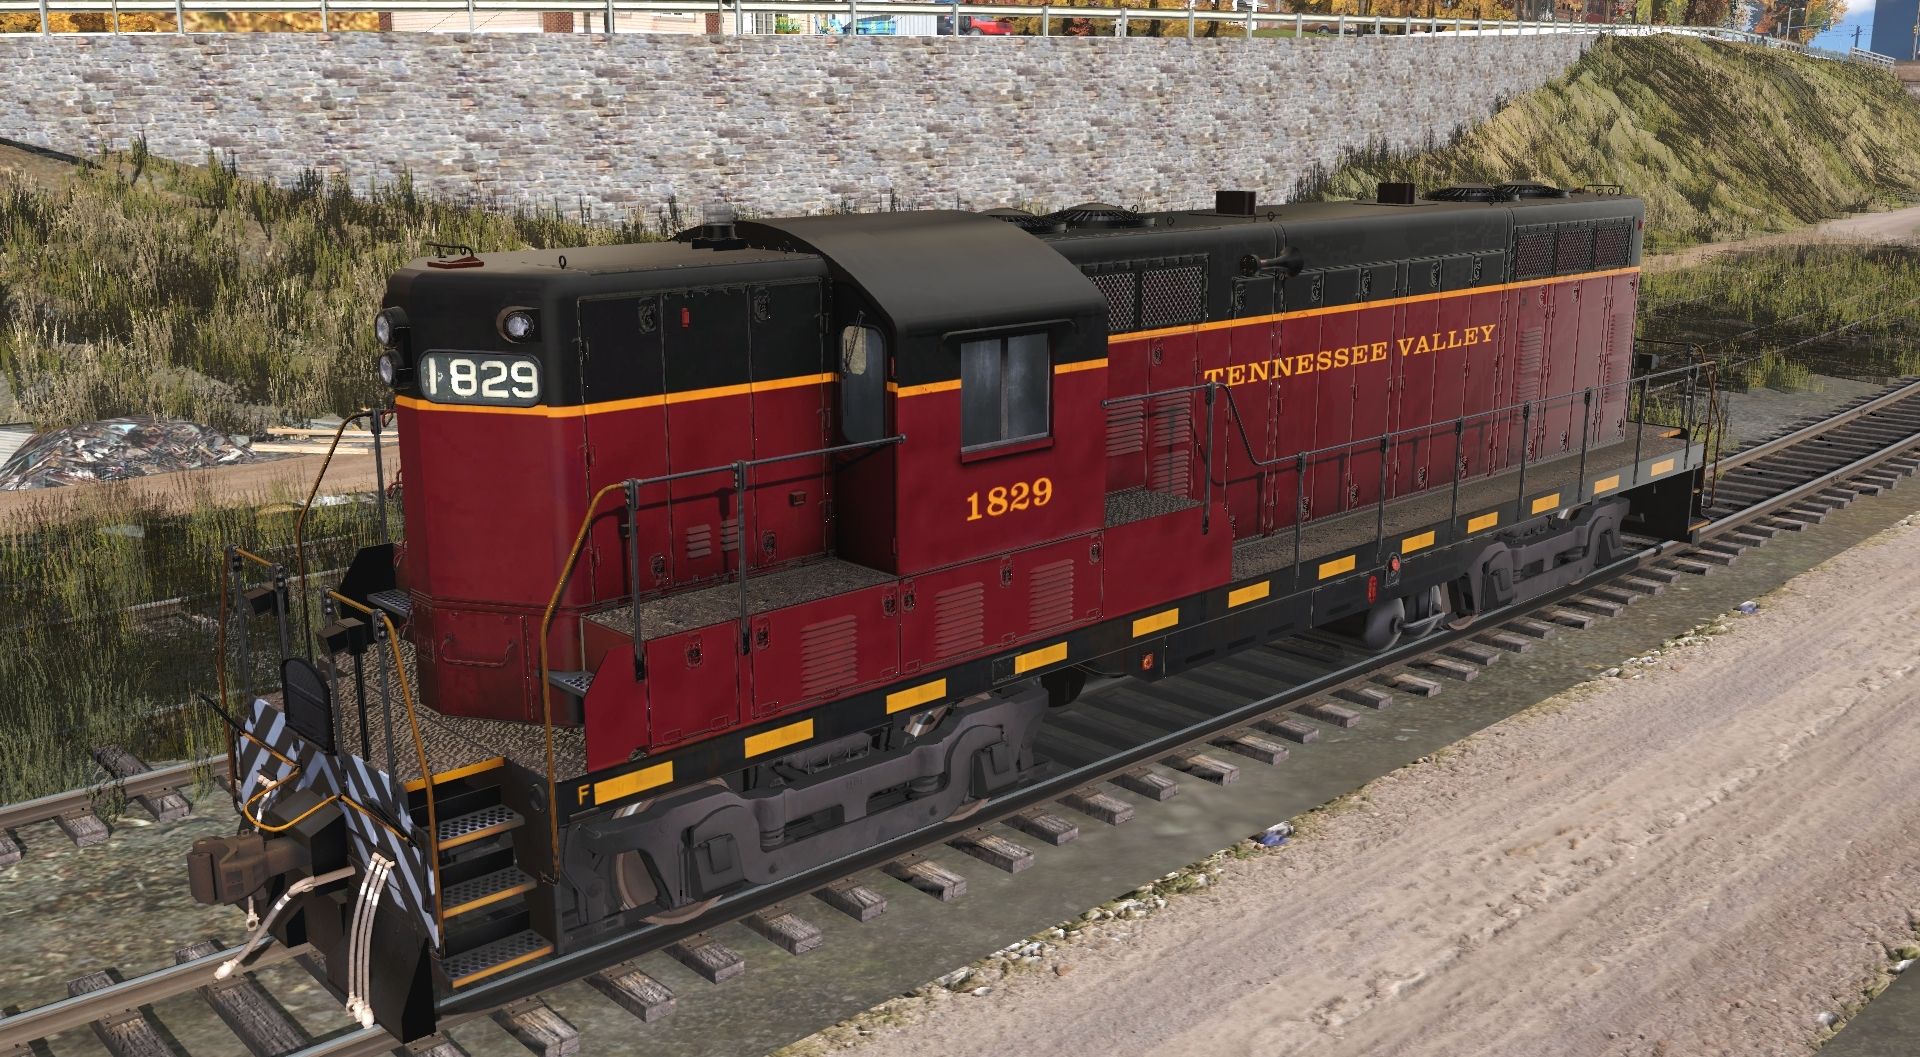 My New Johnson the red engine reskin for Trainz by